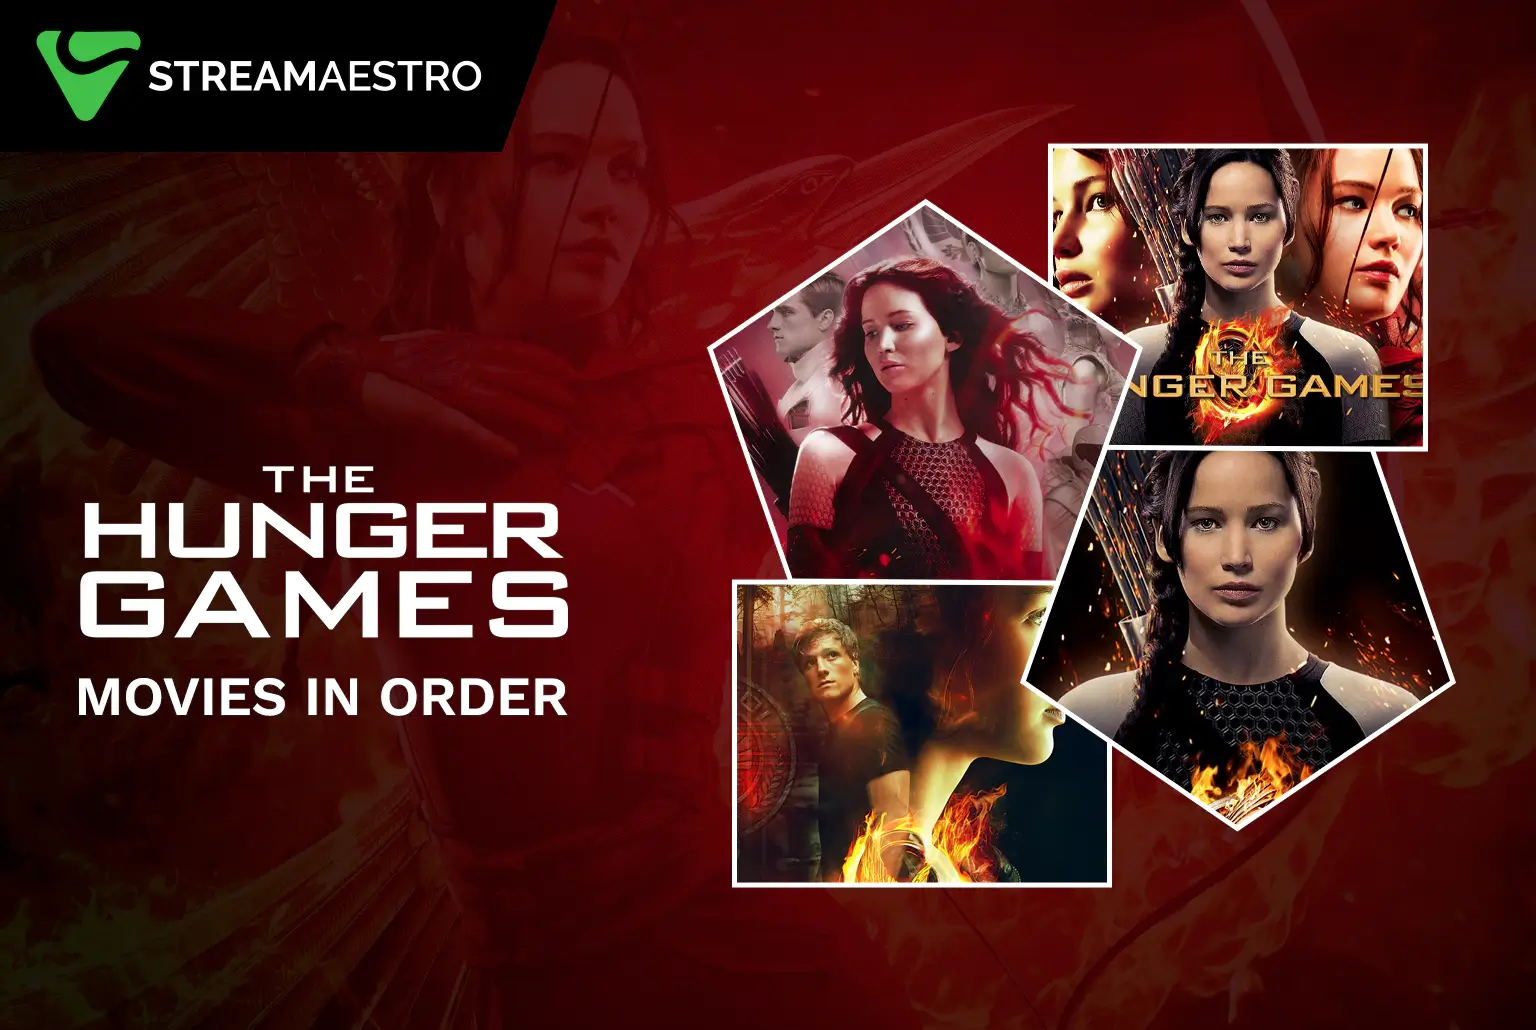 How to Watch Hunger Games Movies in Order [Updated February 2023]